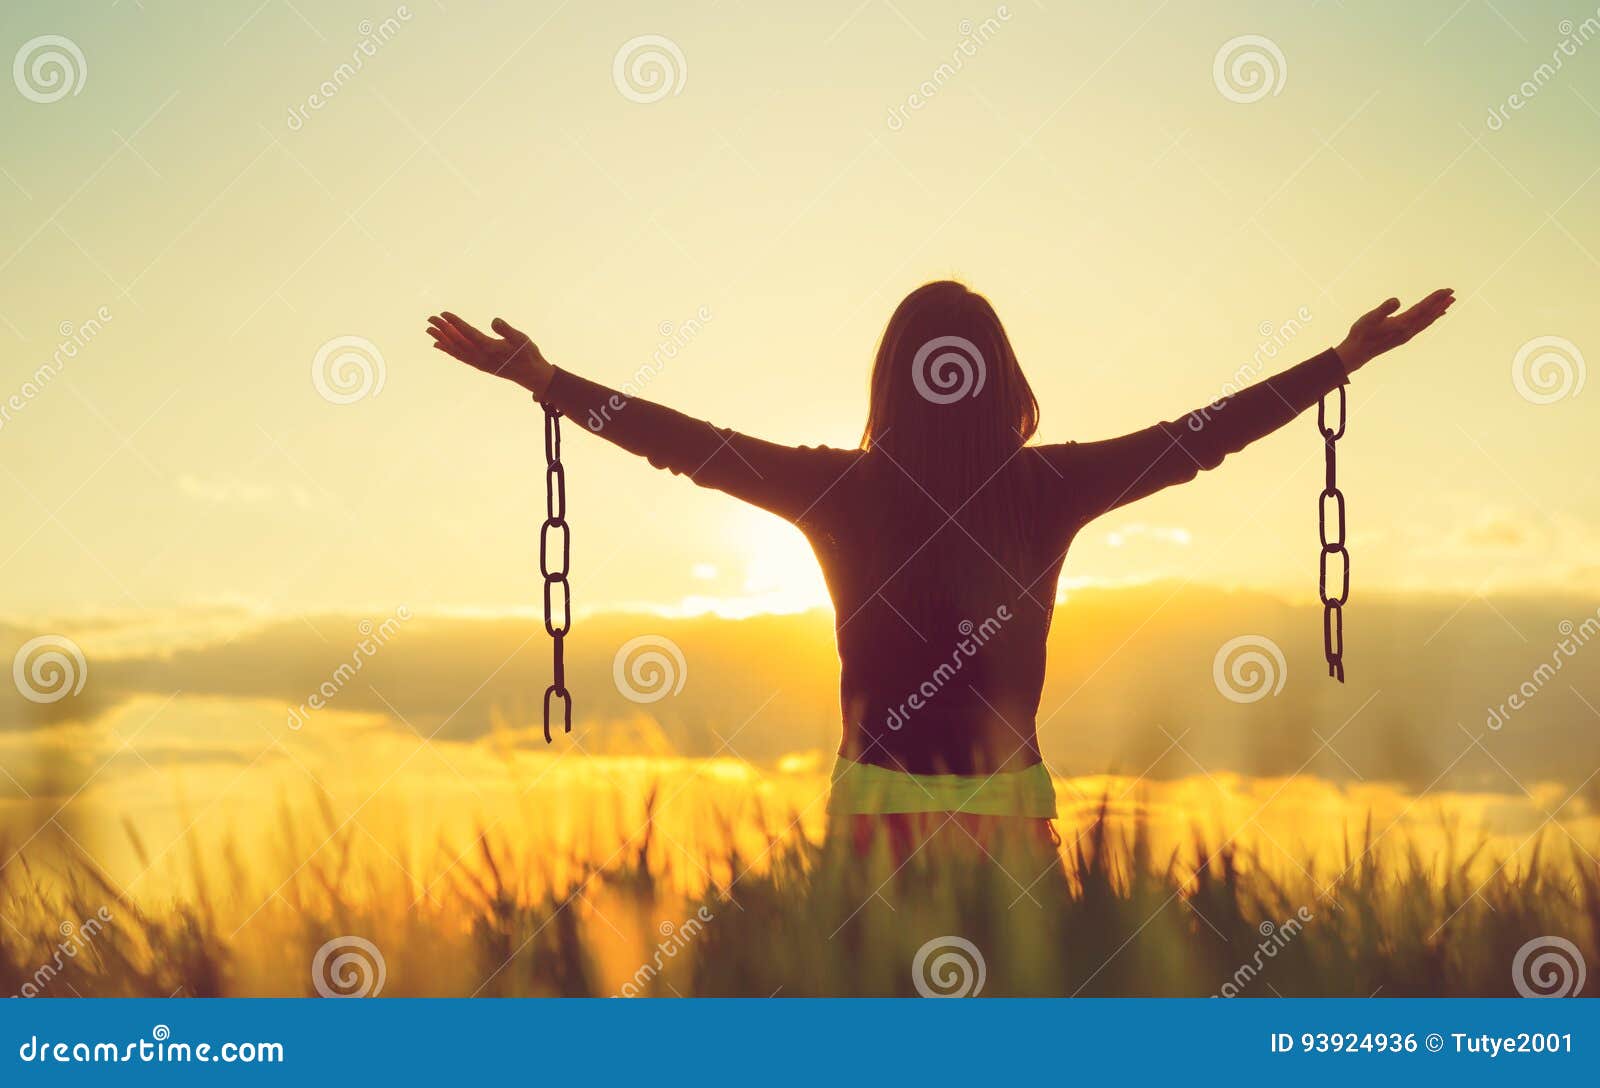 woman feeling free in a beautiful natural landscape